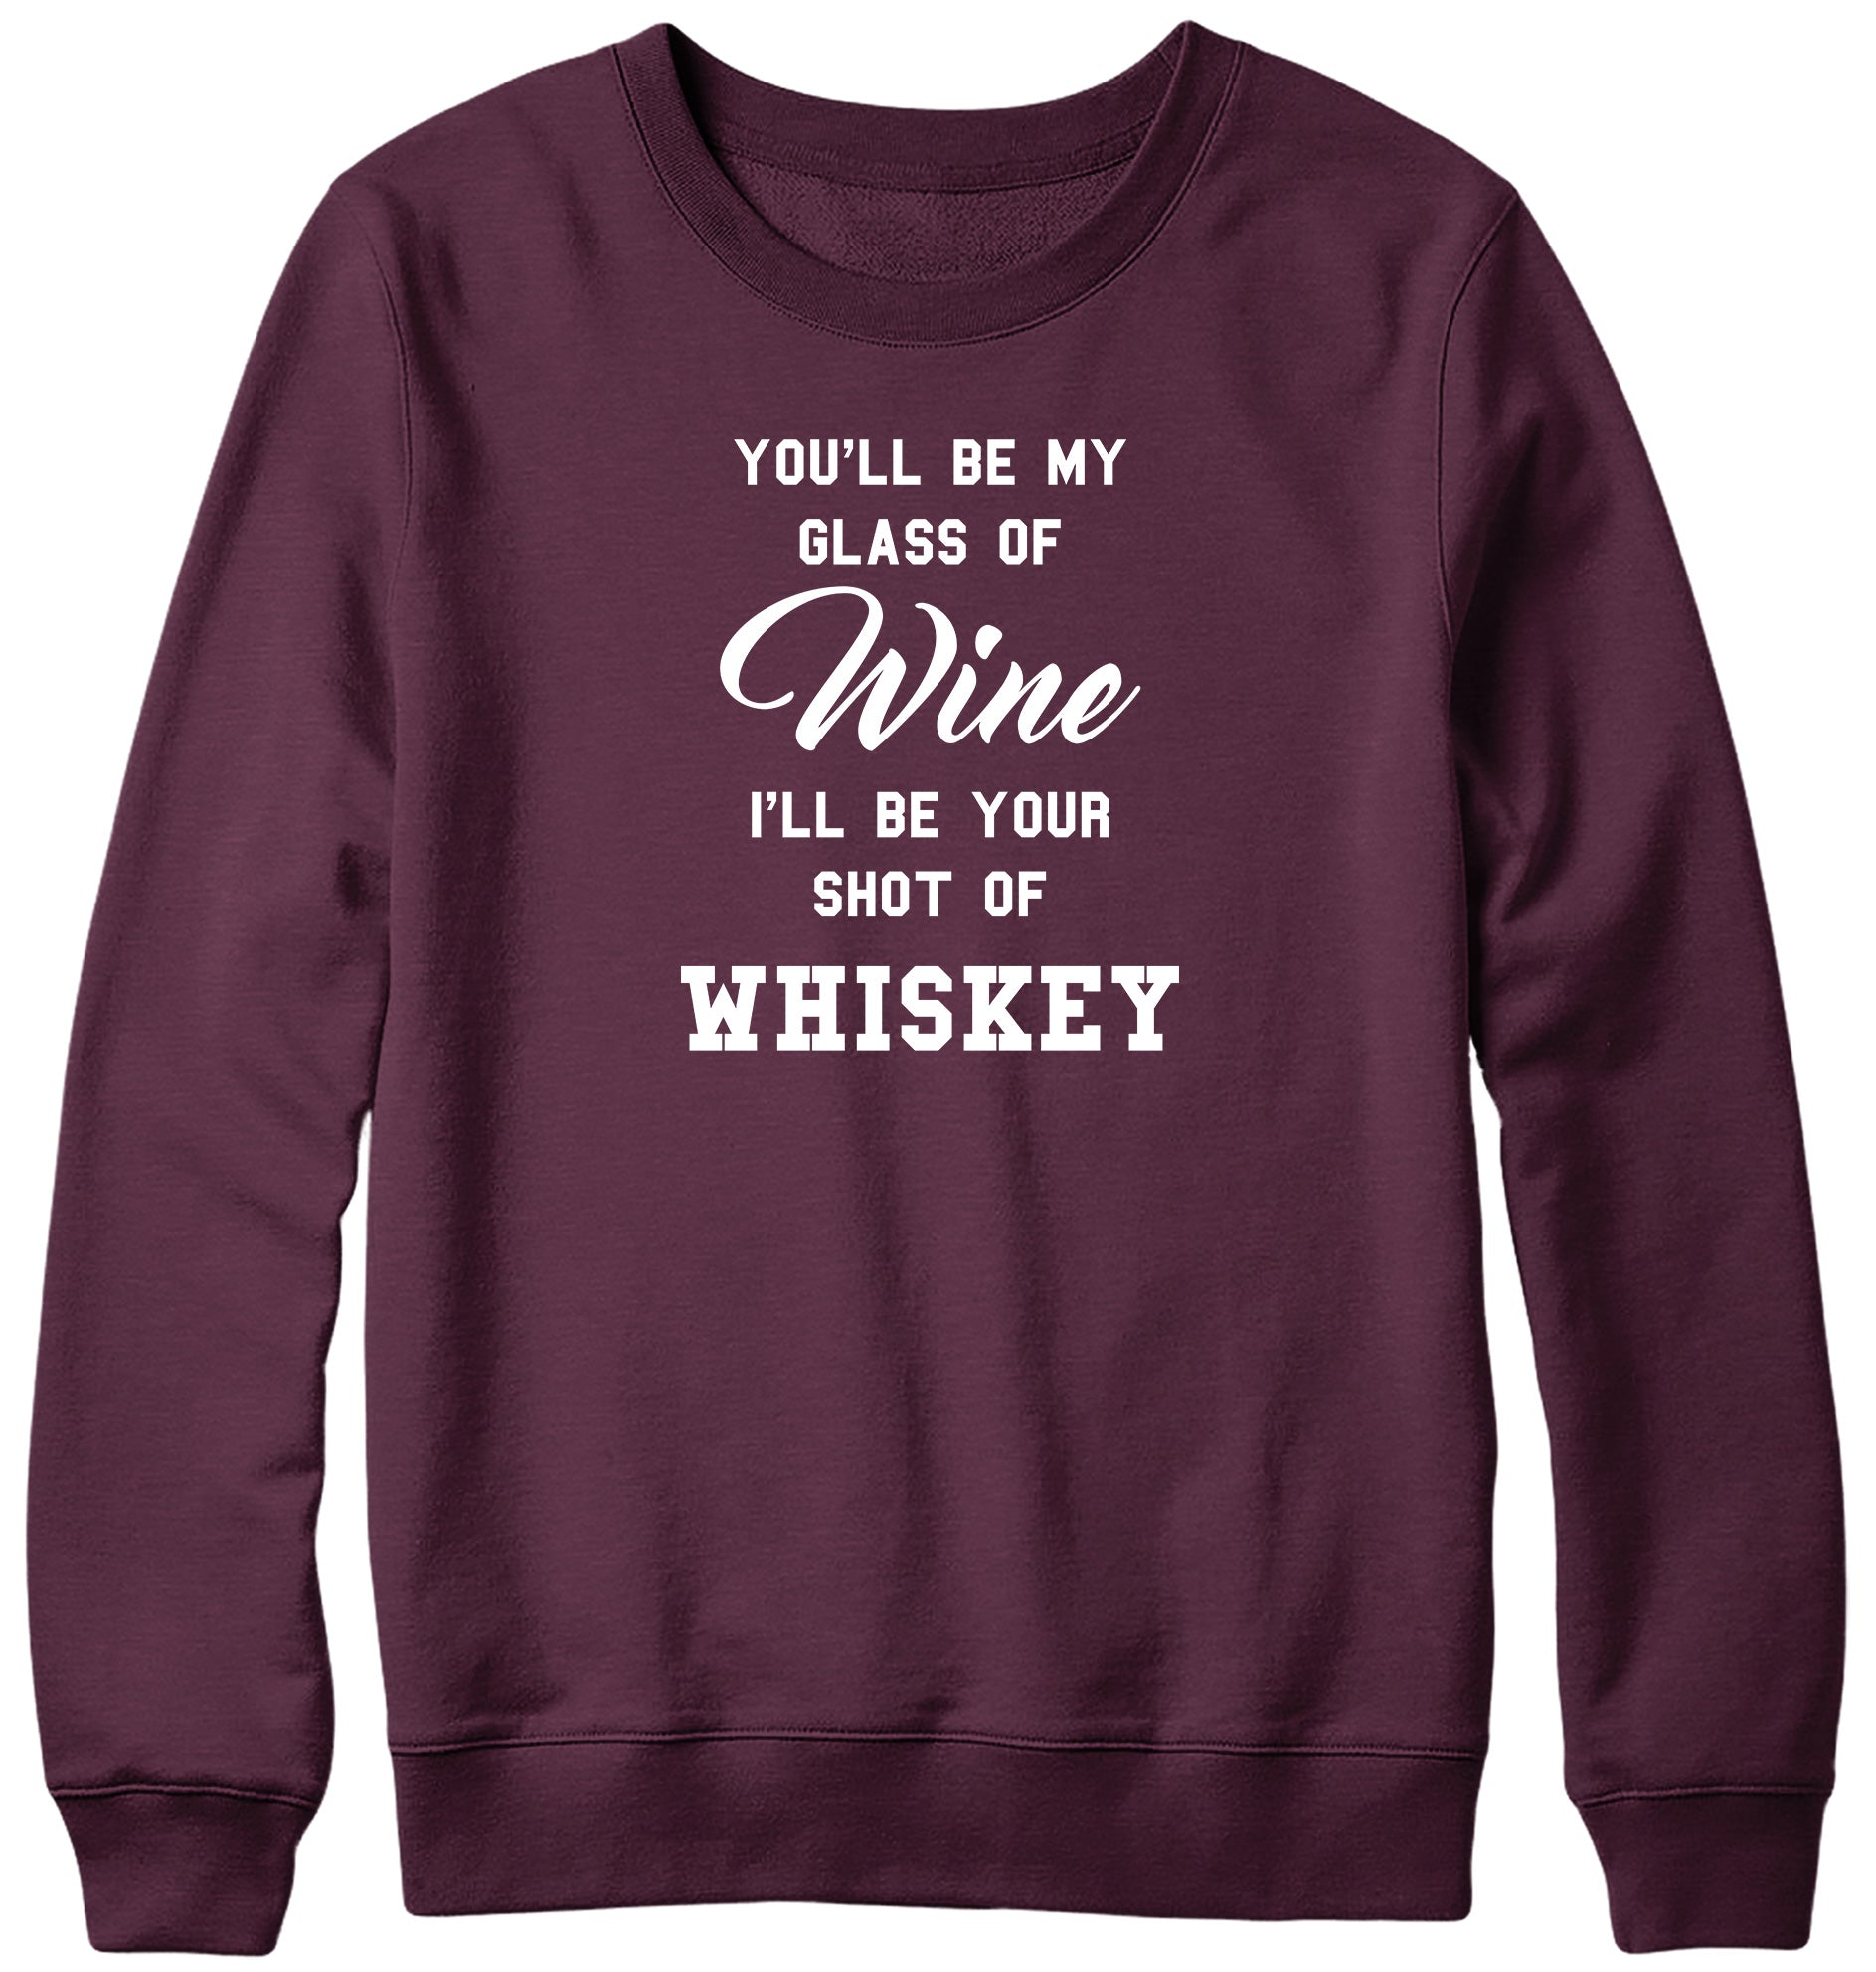 YOU'LL BE MY GLASS OF WINE  I'LL BE YOUR SHOT OF WHISKEY MENS LADIES WOMENS UNISEX SWEATSHIRT SWEATER